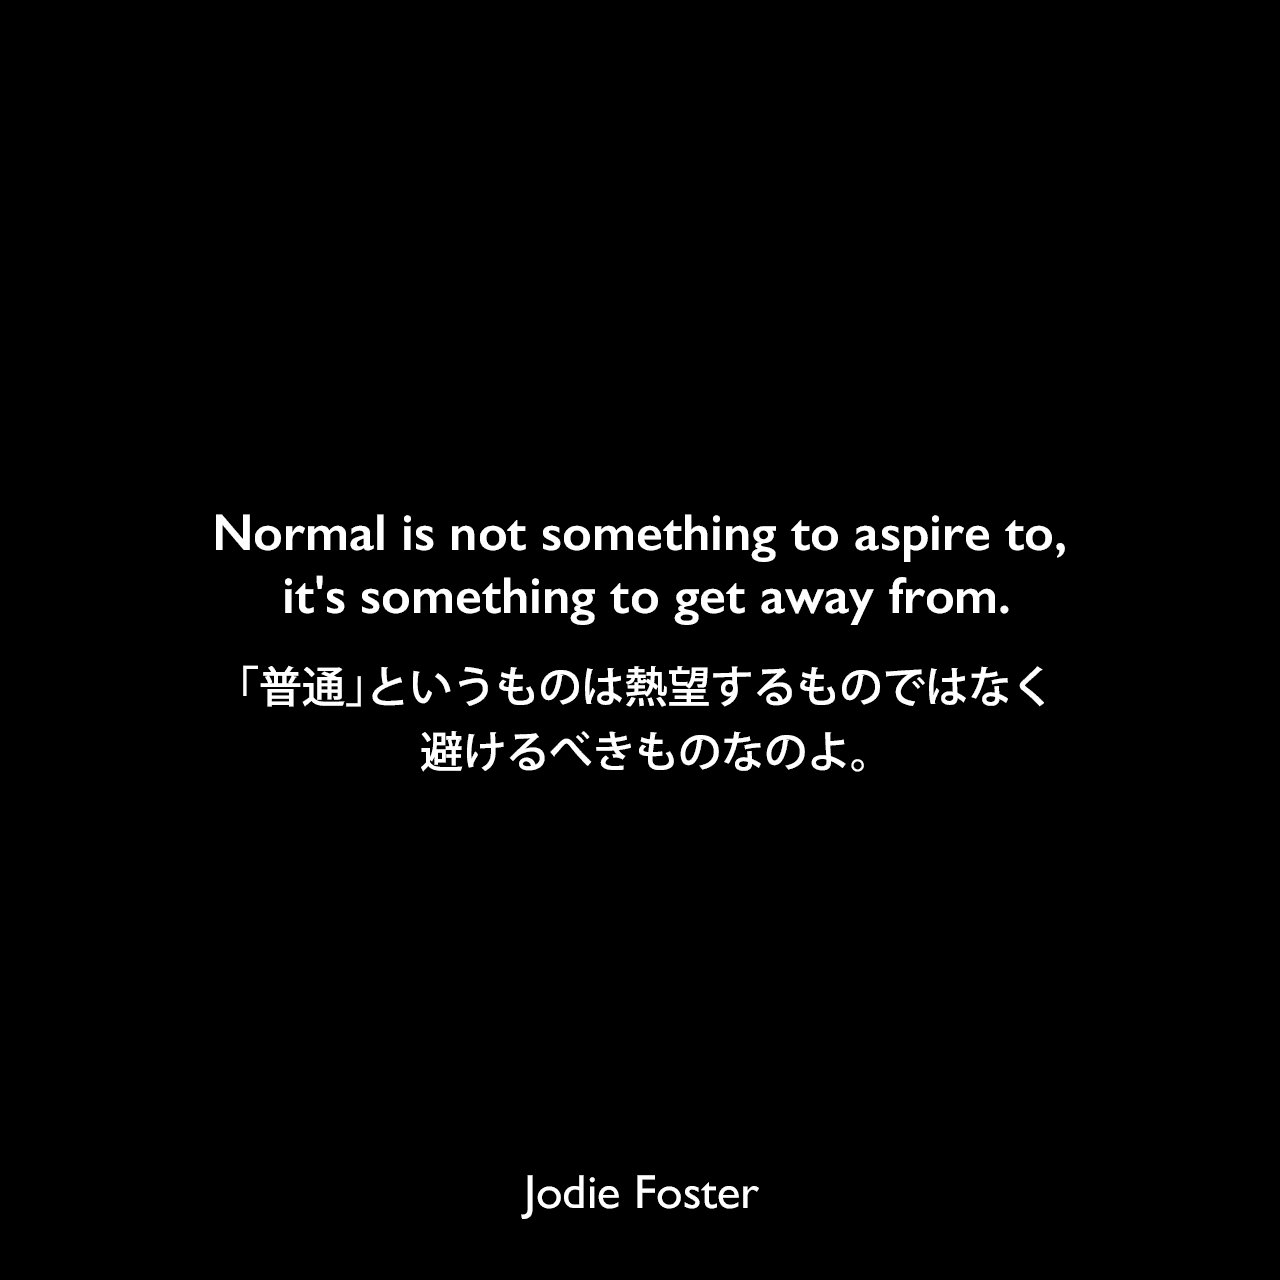 Normal is not something to aspire to, it’s something to get away from.「普通」というものは熱望するものではなく、避けるべきものなのよ。